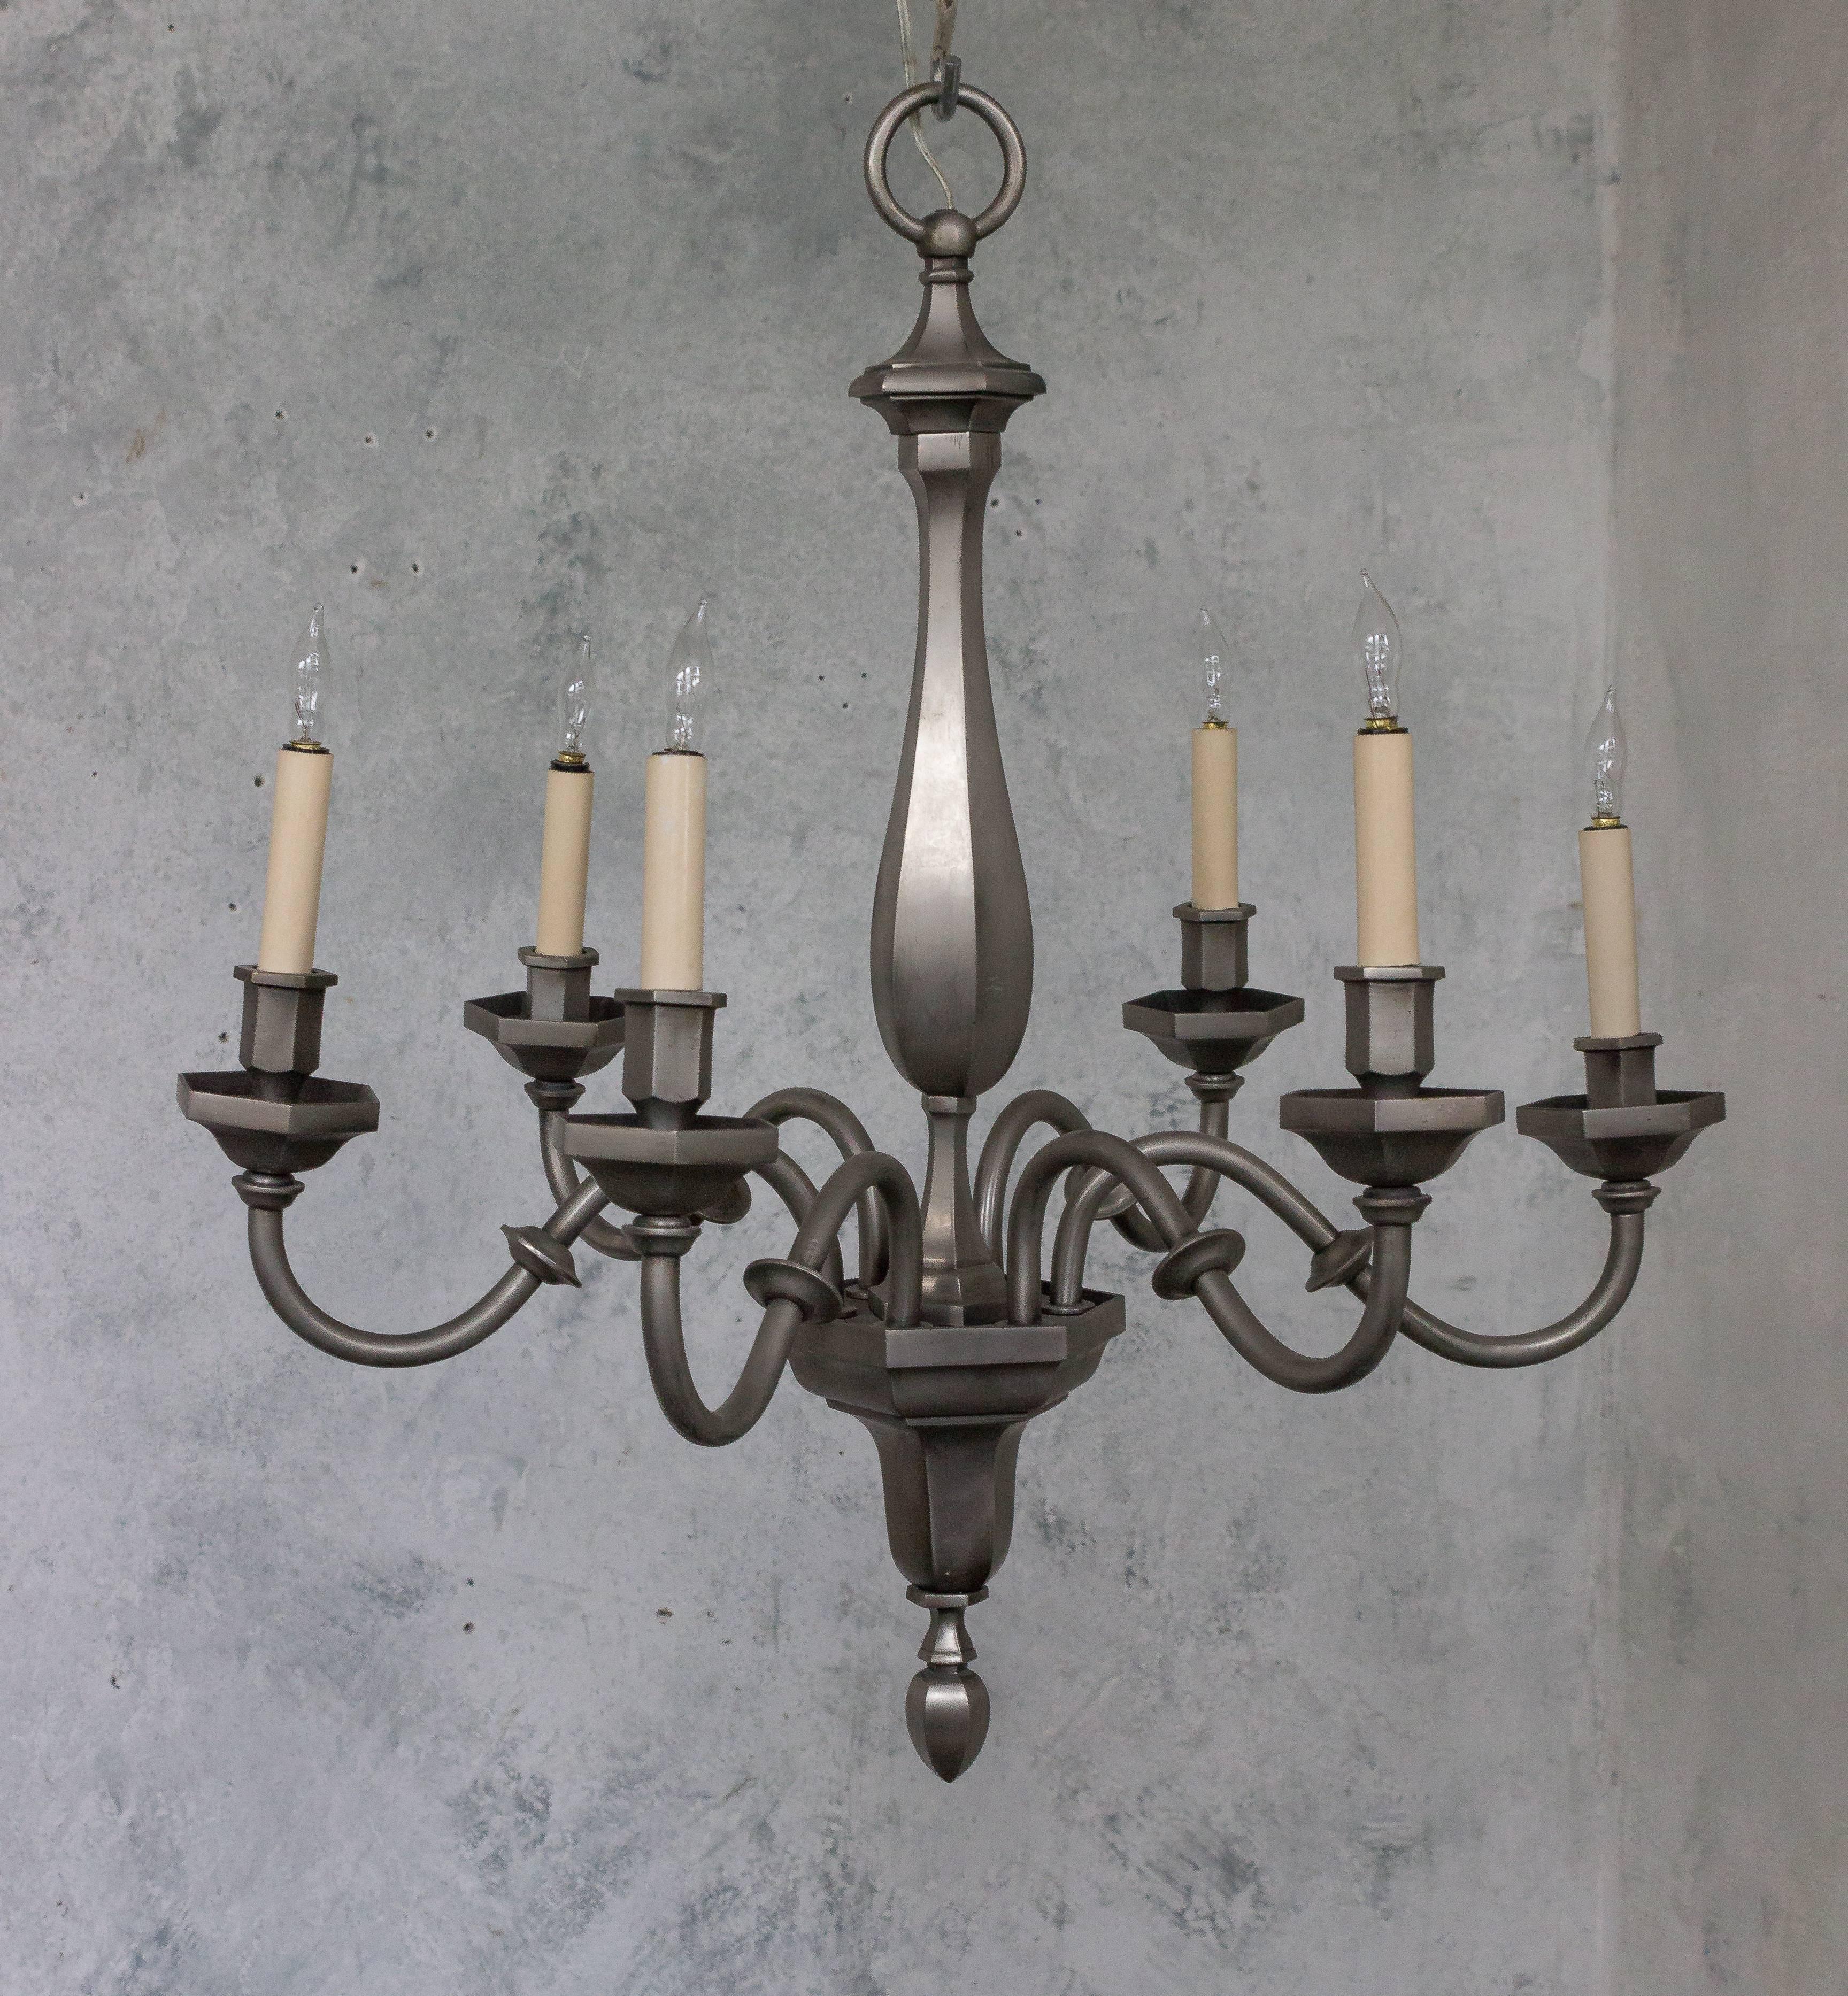 This French chandelier from the 1940s is a striking combination of bronze and metal. Designed in a neoclassical style, it features six arms that gracefully extend from its center. The chandelier has recently been refinished in a warm, antiqued